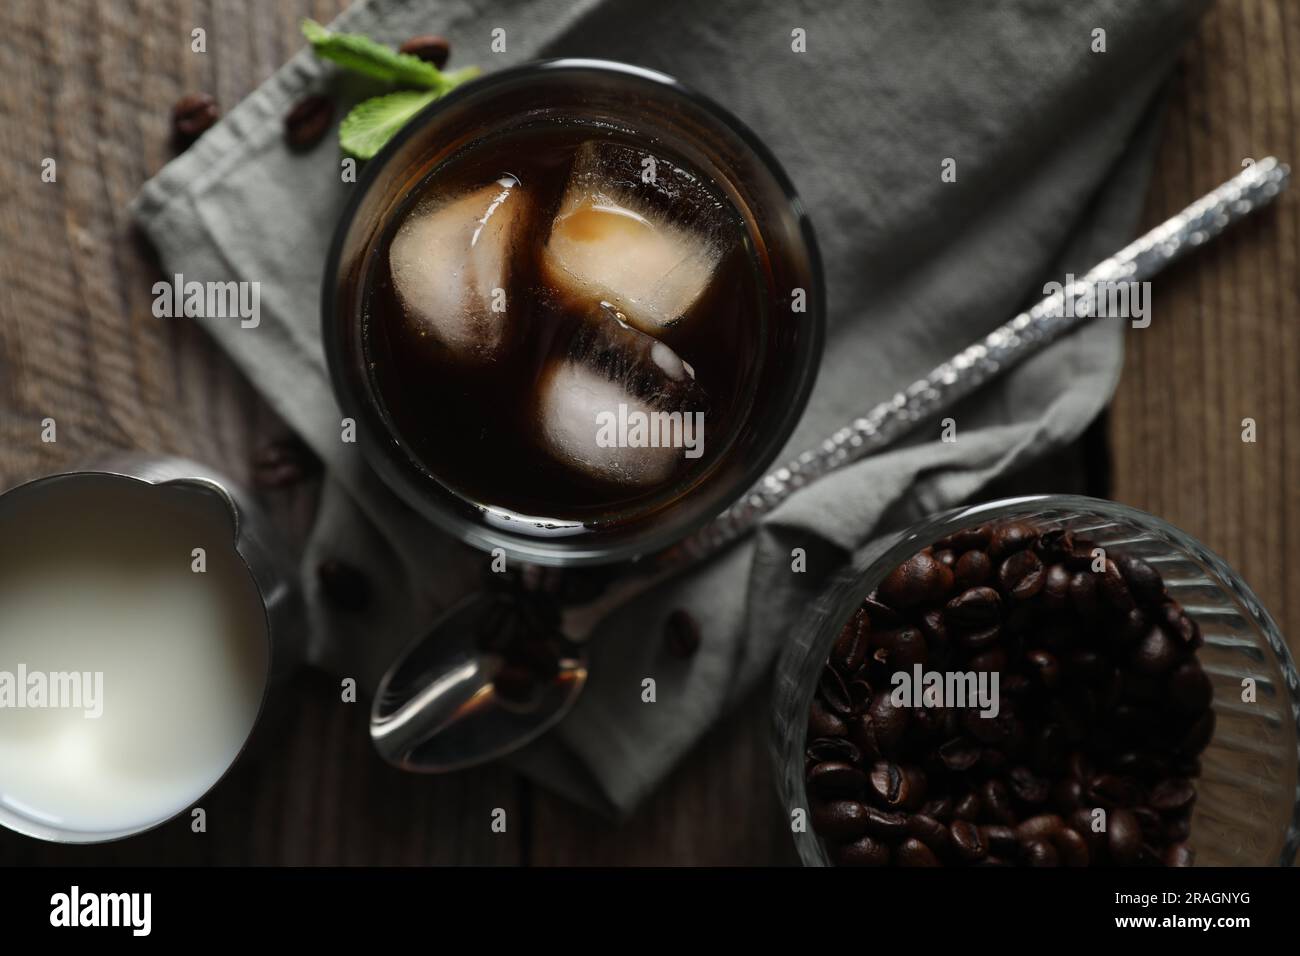 Ice cubes made with coffee in blue ice cube tray to prepare refreshing  coffee drinks like iced coffee. White background, view from above, isolated  Stock Photo - Alamy